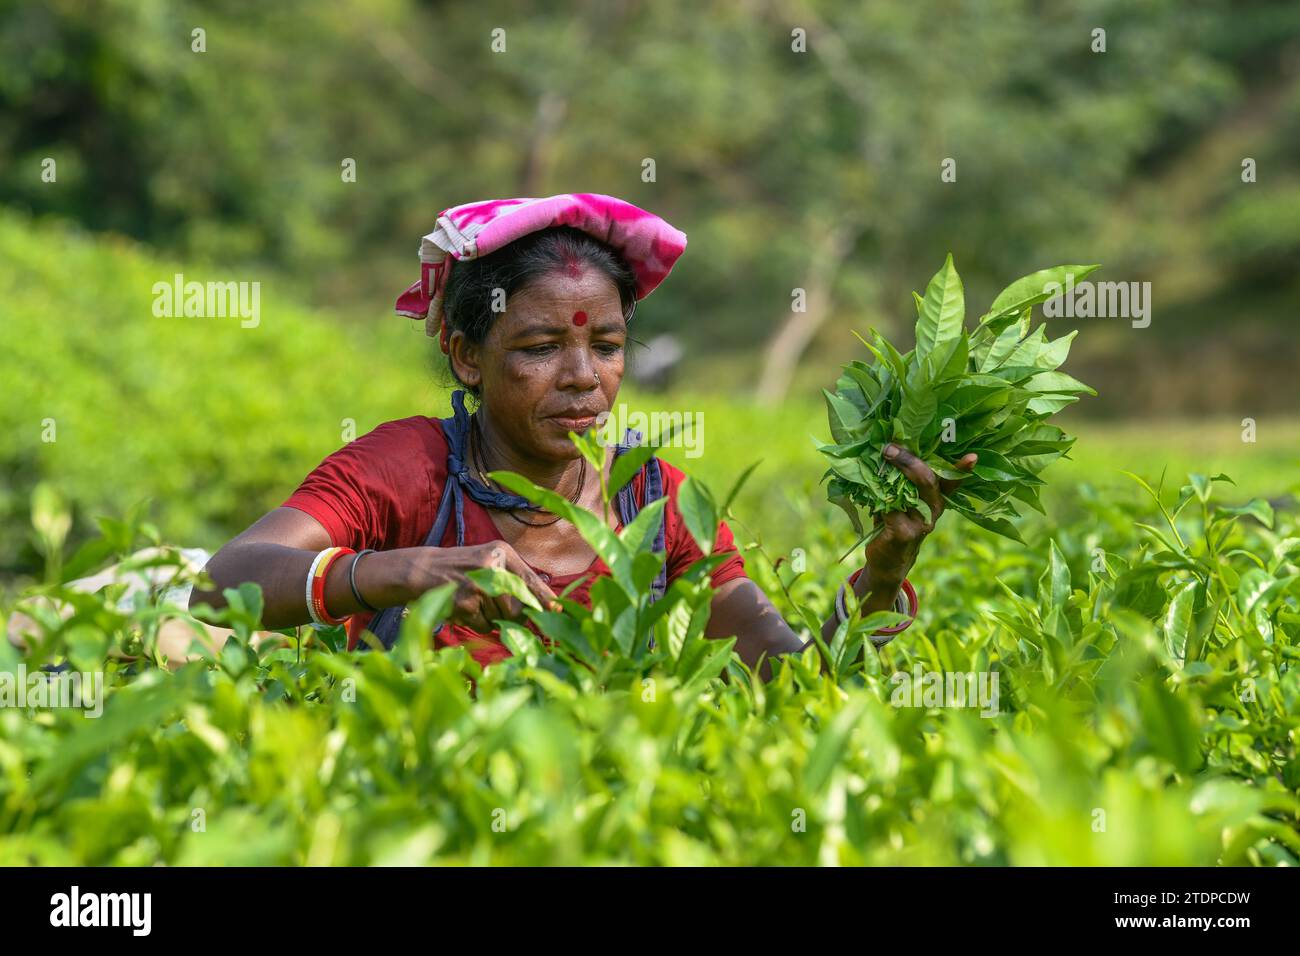 A female worker seen plucking tea leaves at the tea garden in Moulvibazar. Tea Plucking is a specialized skill. Two leaves and a bud need to be plucked in order to get the best taste and profitability. The calculation of daily wage is 170tk (1.60$) for plucking at least 22-23 kg leaves per day for a worker. The area of Sylhet has over 150 gardens including three of the largest tea gardens in the world both in the area. Nearly 300,000 workers are employed in the tea gardens of which over 75% are women. Working conditions and wages are considered to be very poor. (Photo by Piyas Biswas/SOPA Im Stock Photo